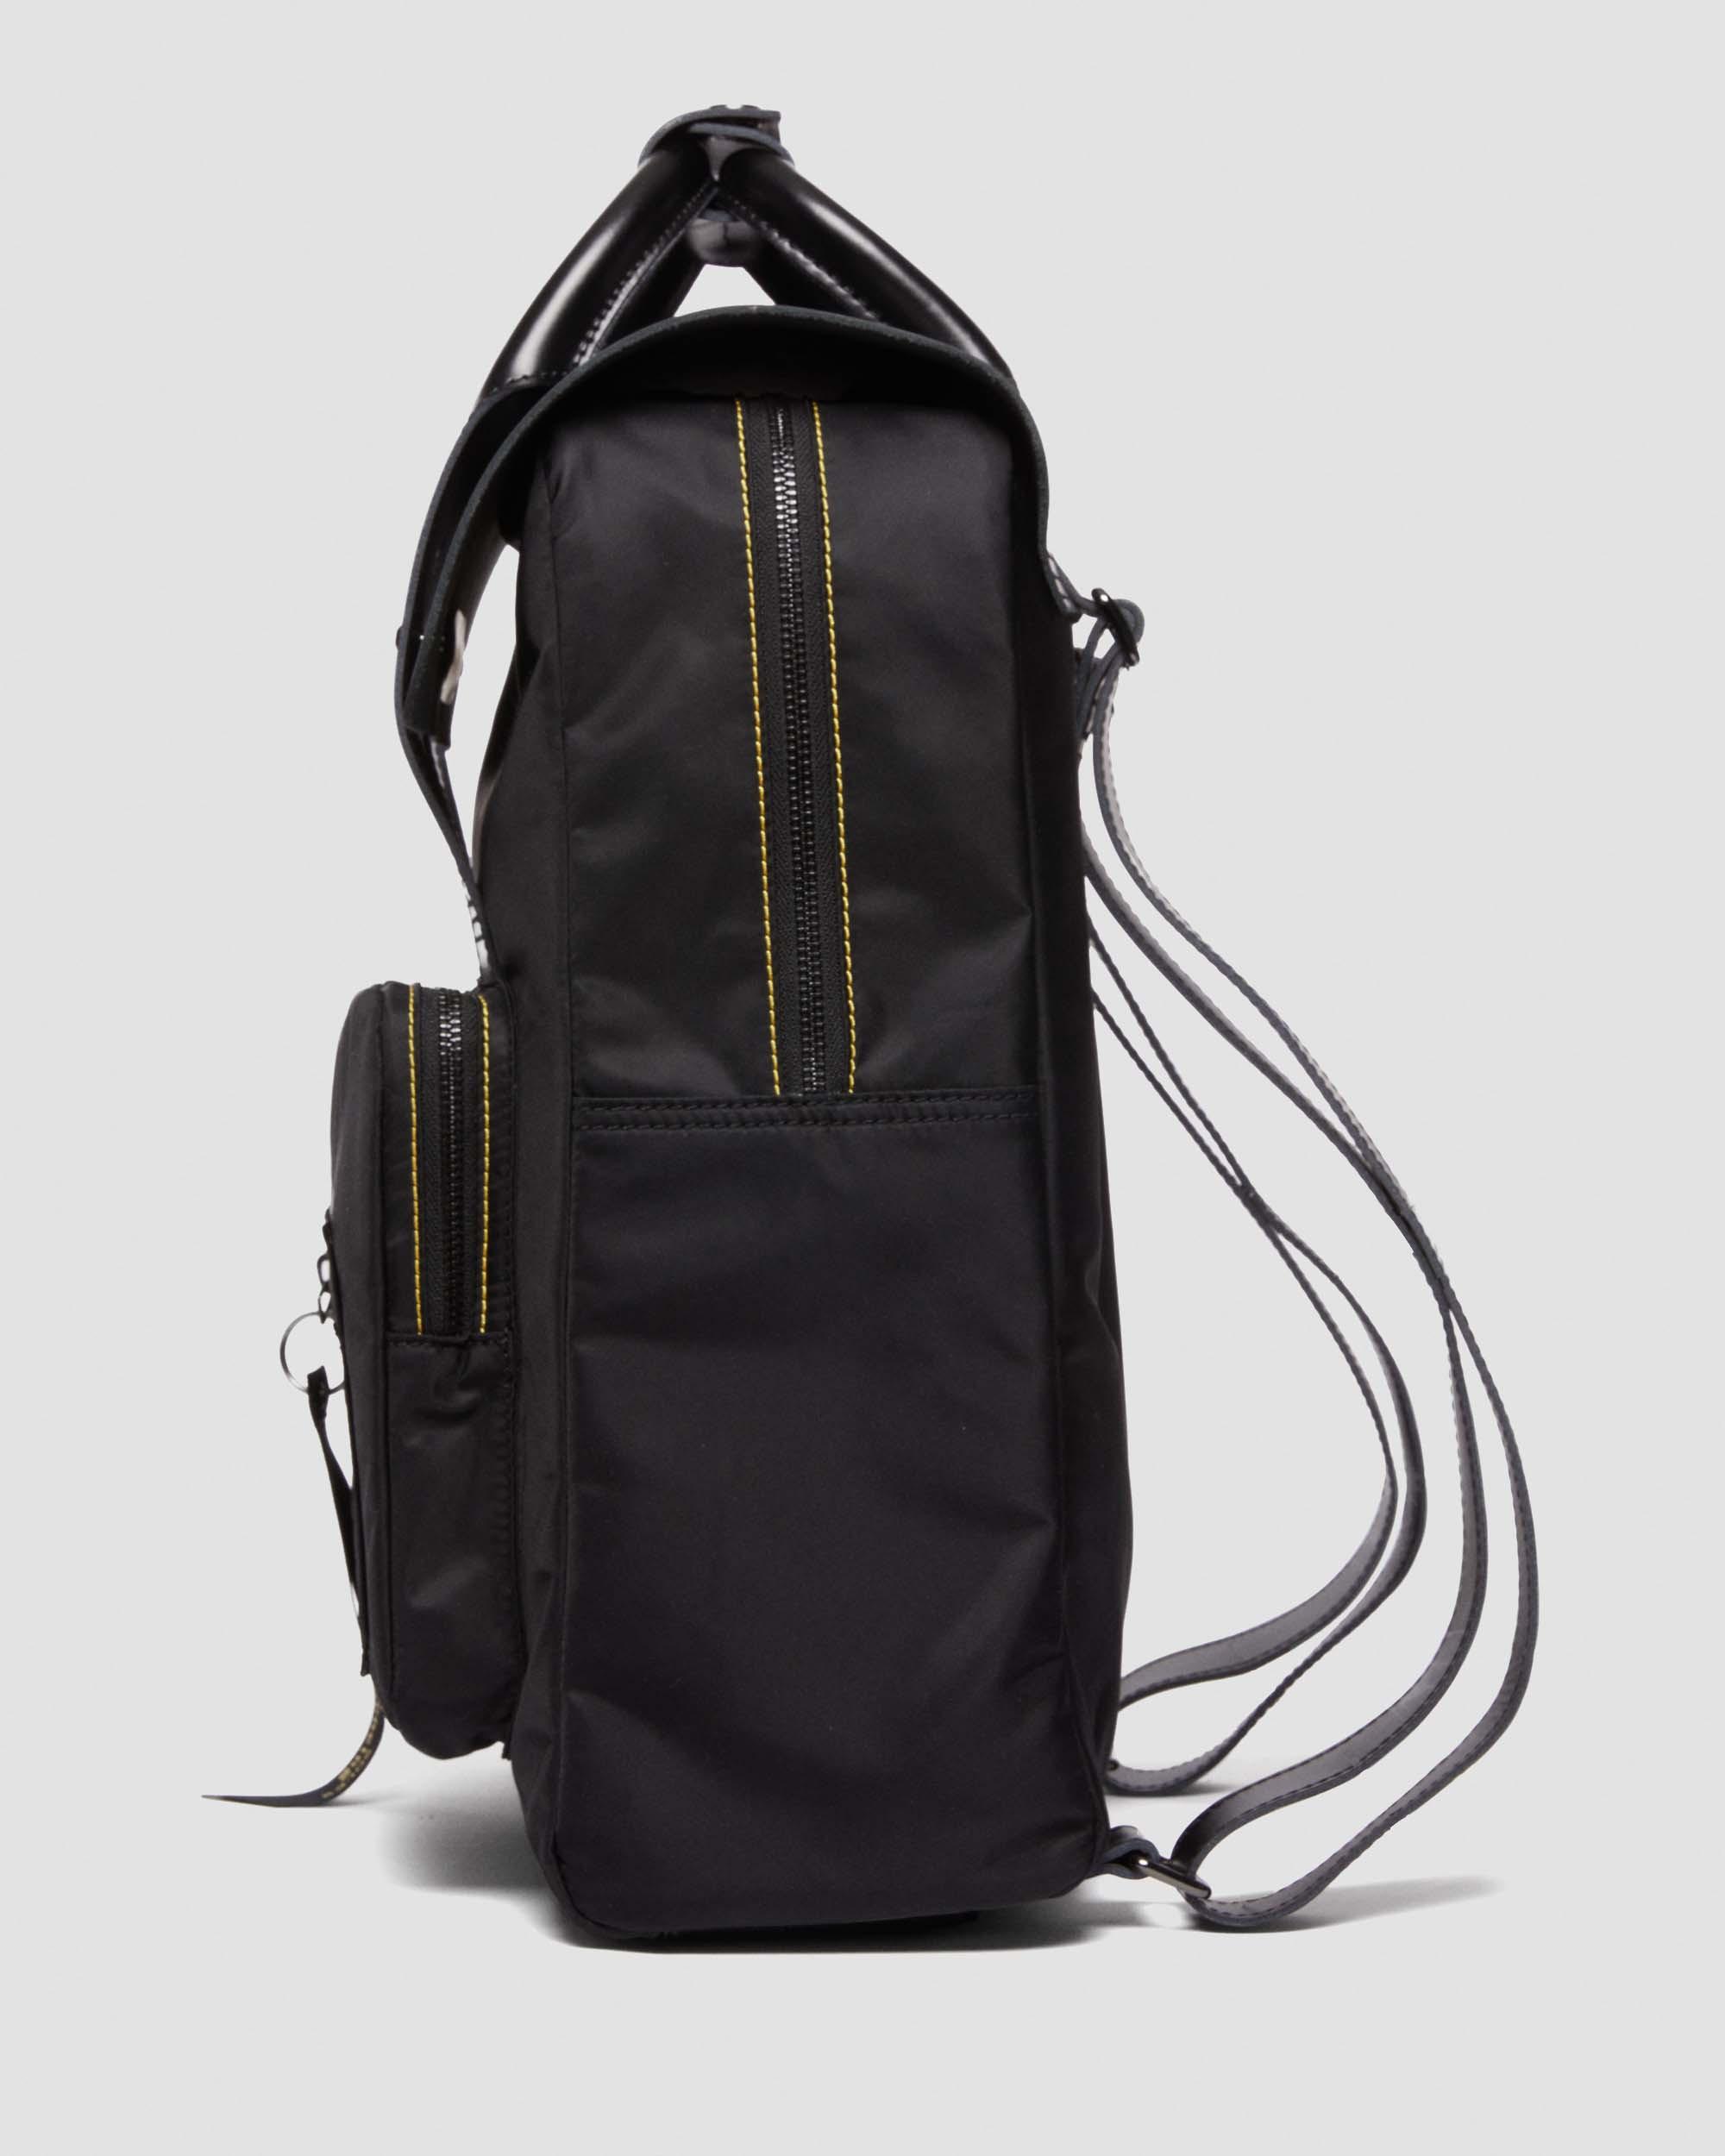 LITE ALPHA INDUSTRIES LEATHER & NYLON BACKPACK in Black